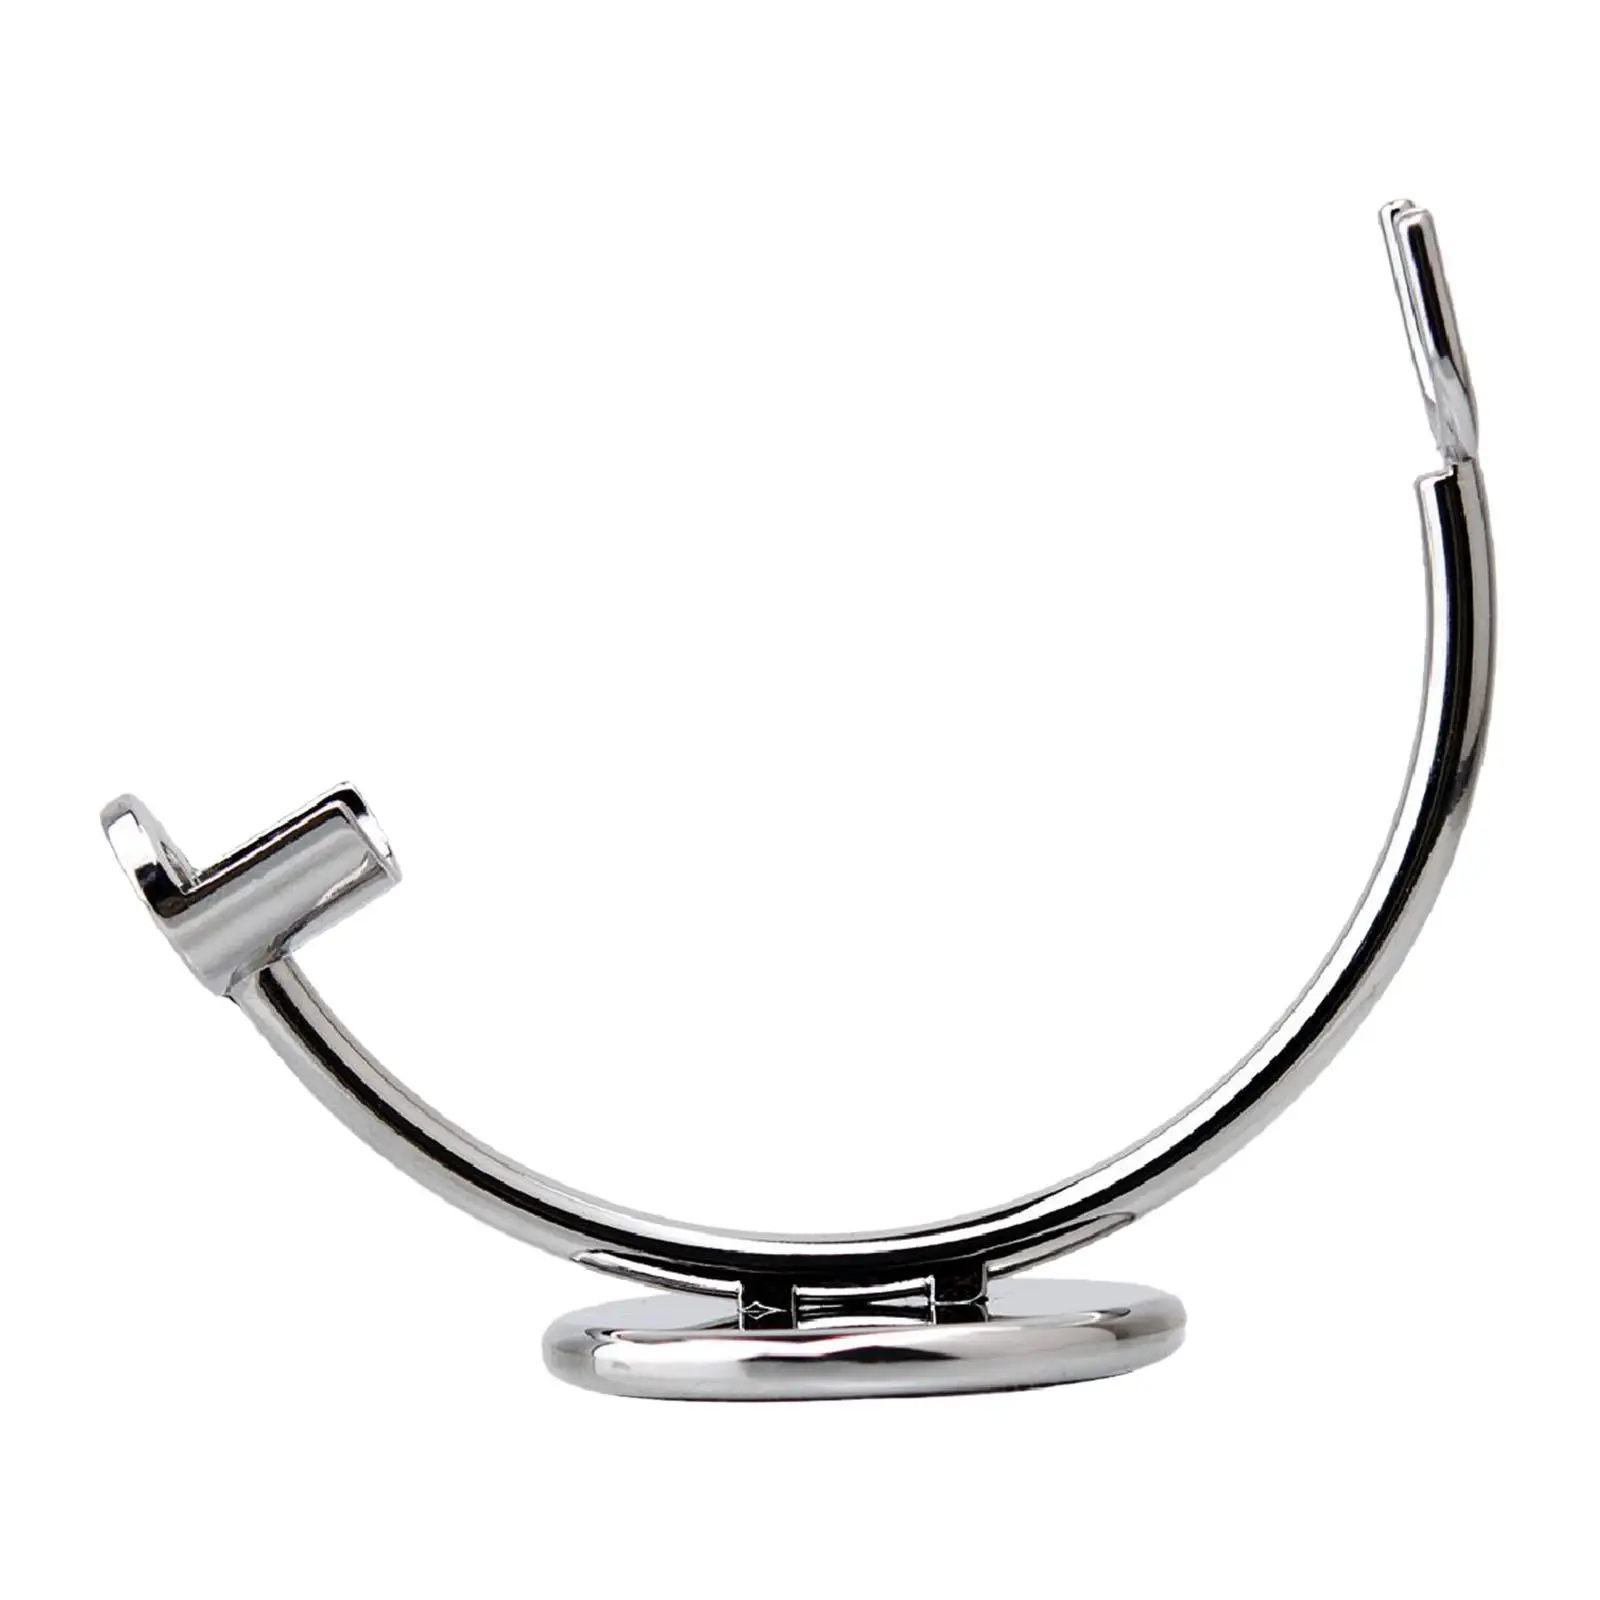 Straight Razor Stand Curved Stand Razor Holder Present for Men Bottom Diameter 5cm/2inch Polished Finishing Accessories Rack